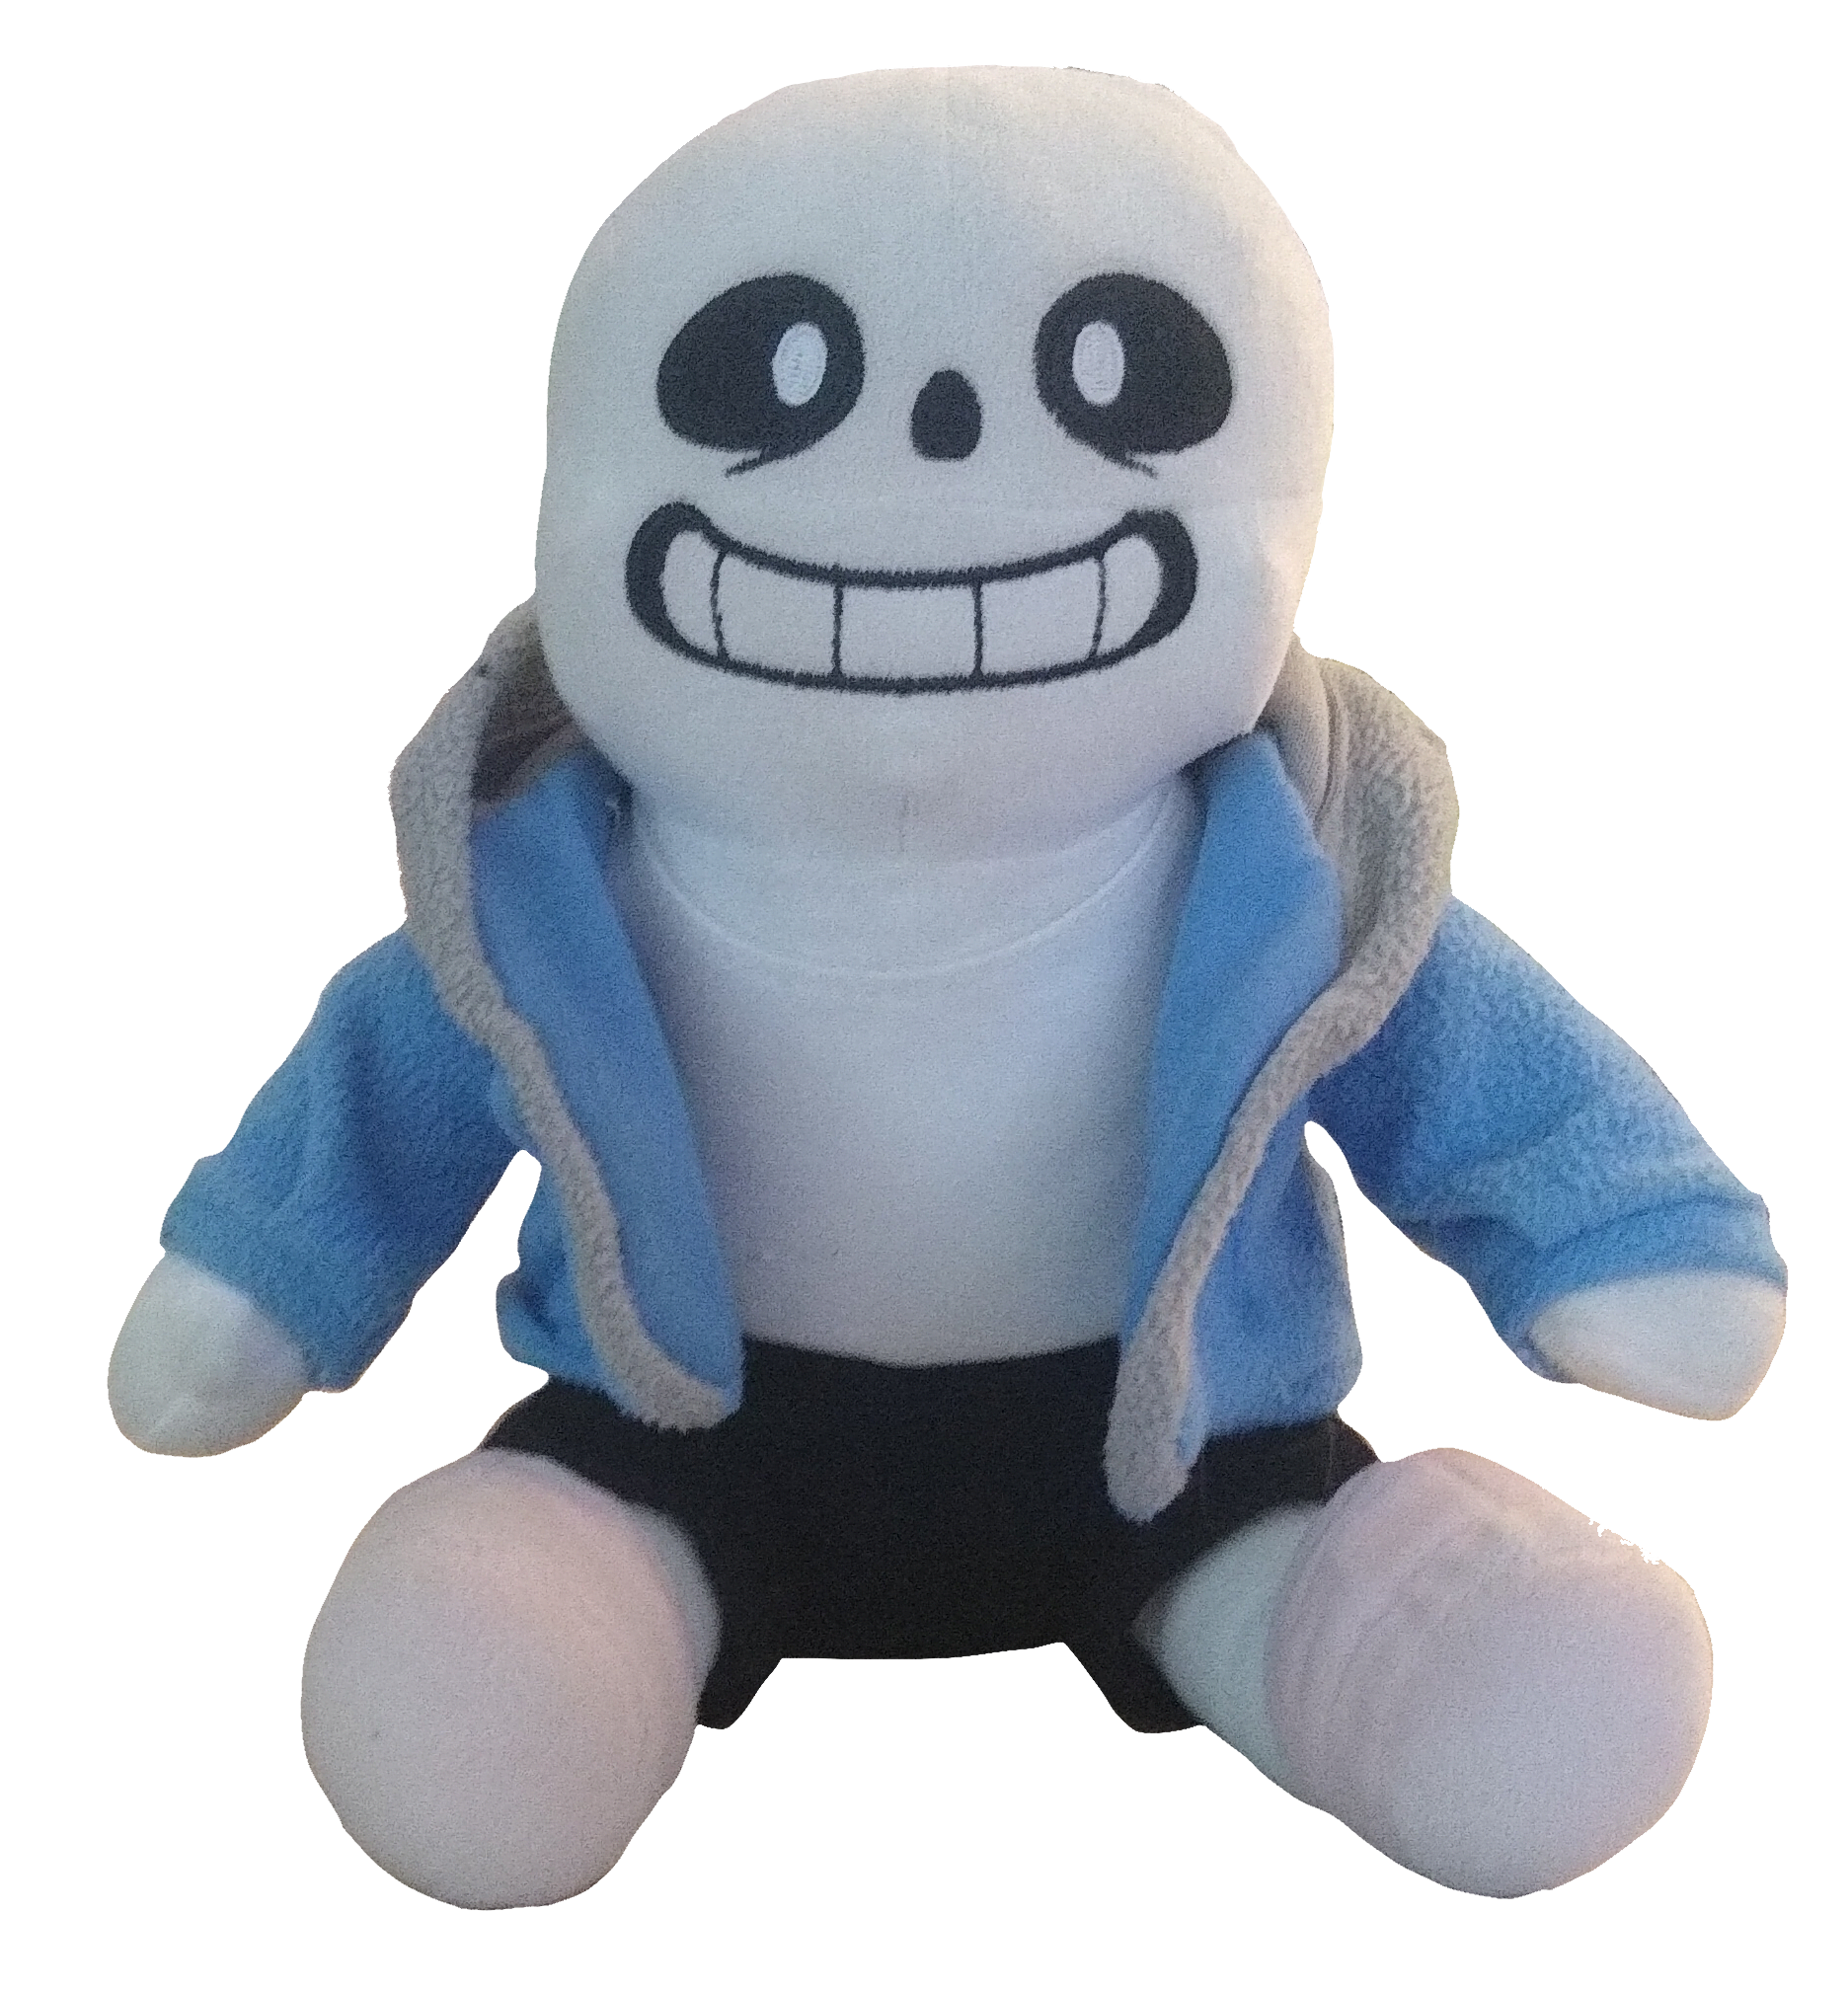 Plushie of Sans from Undertale.